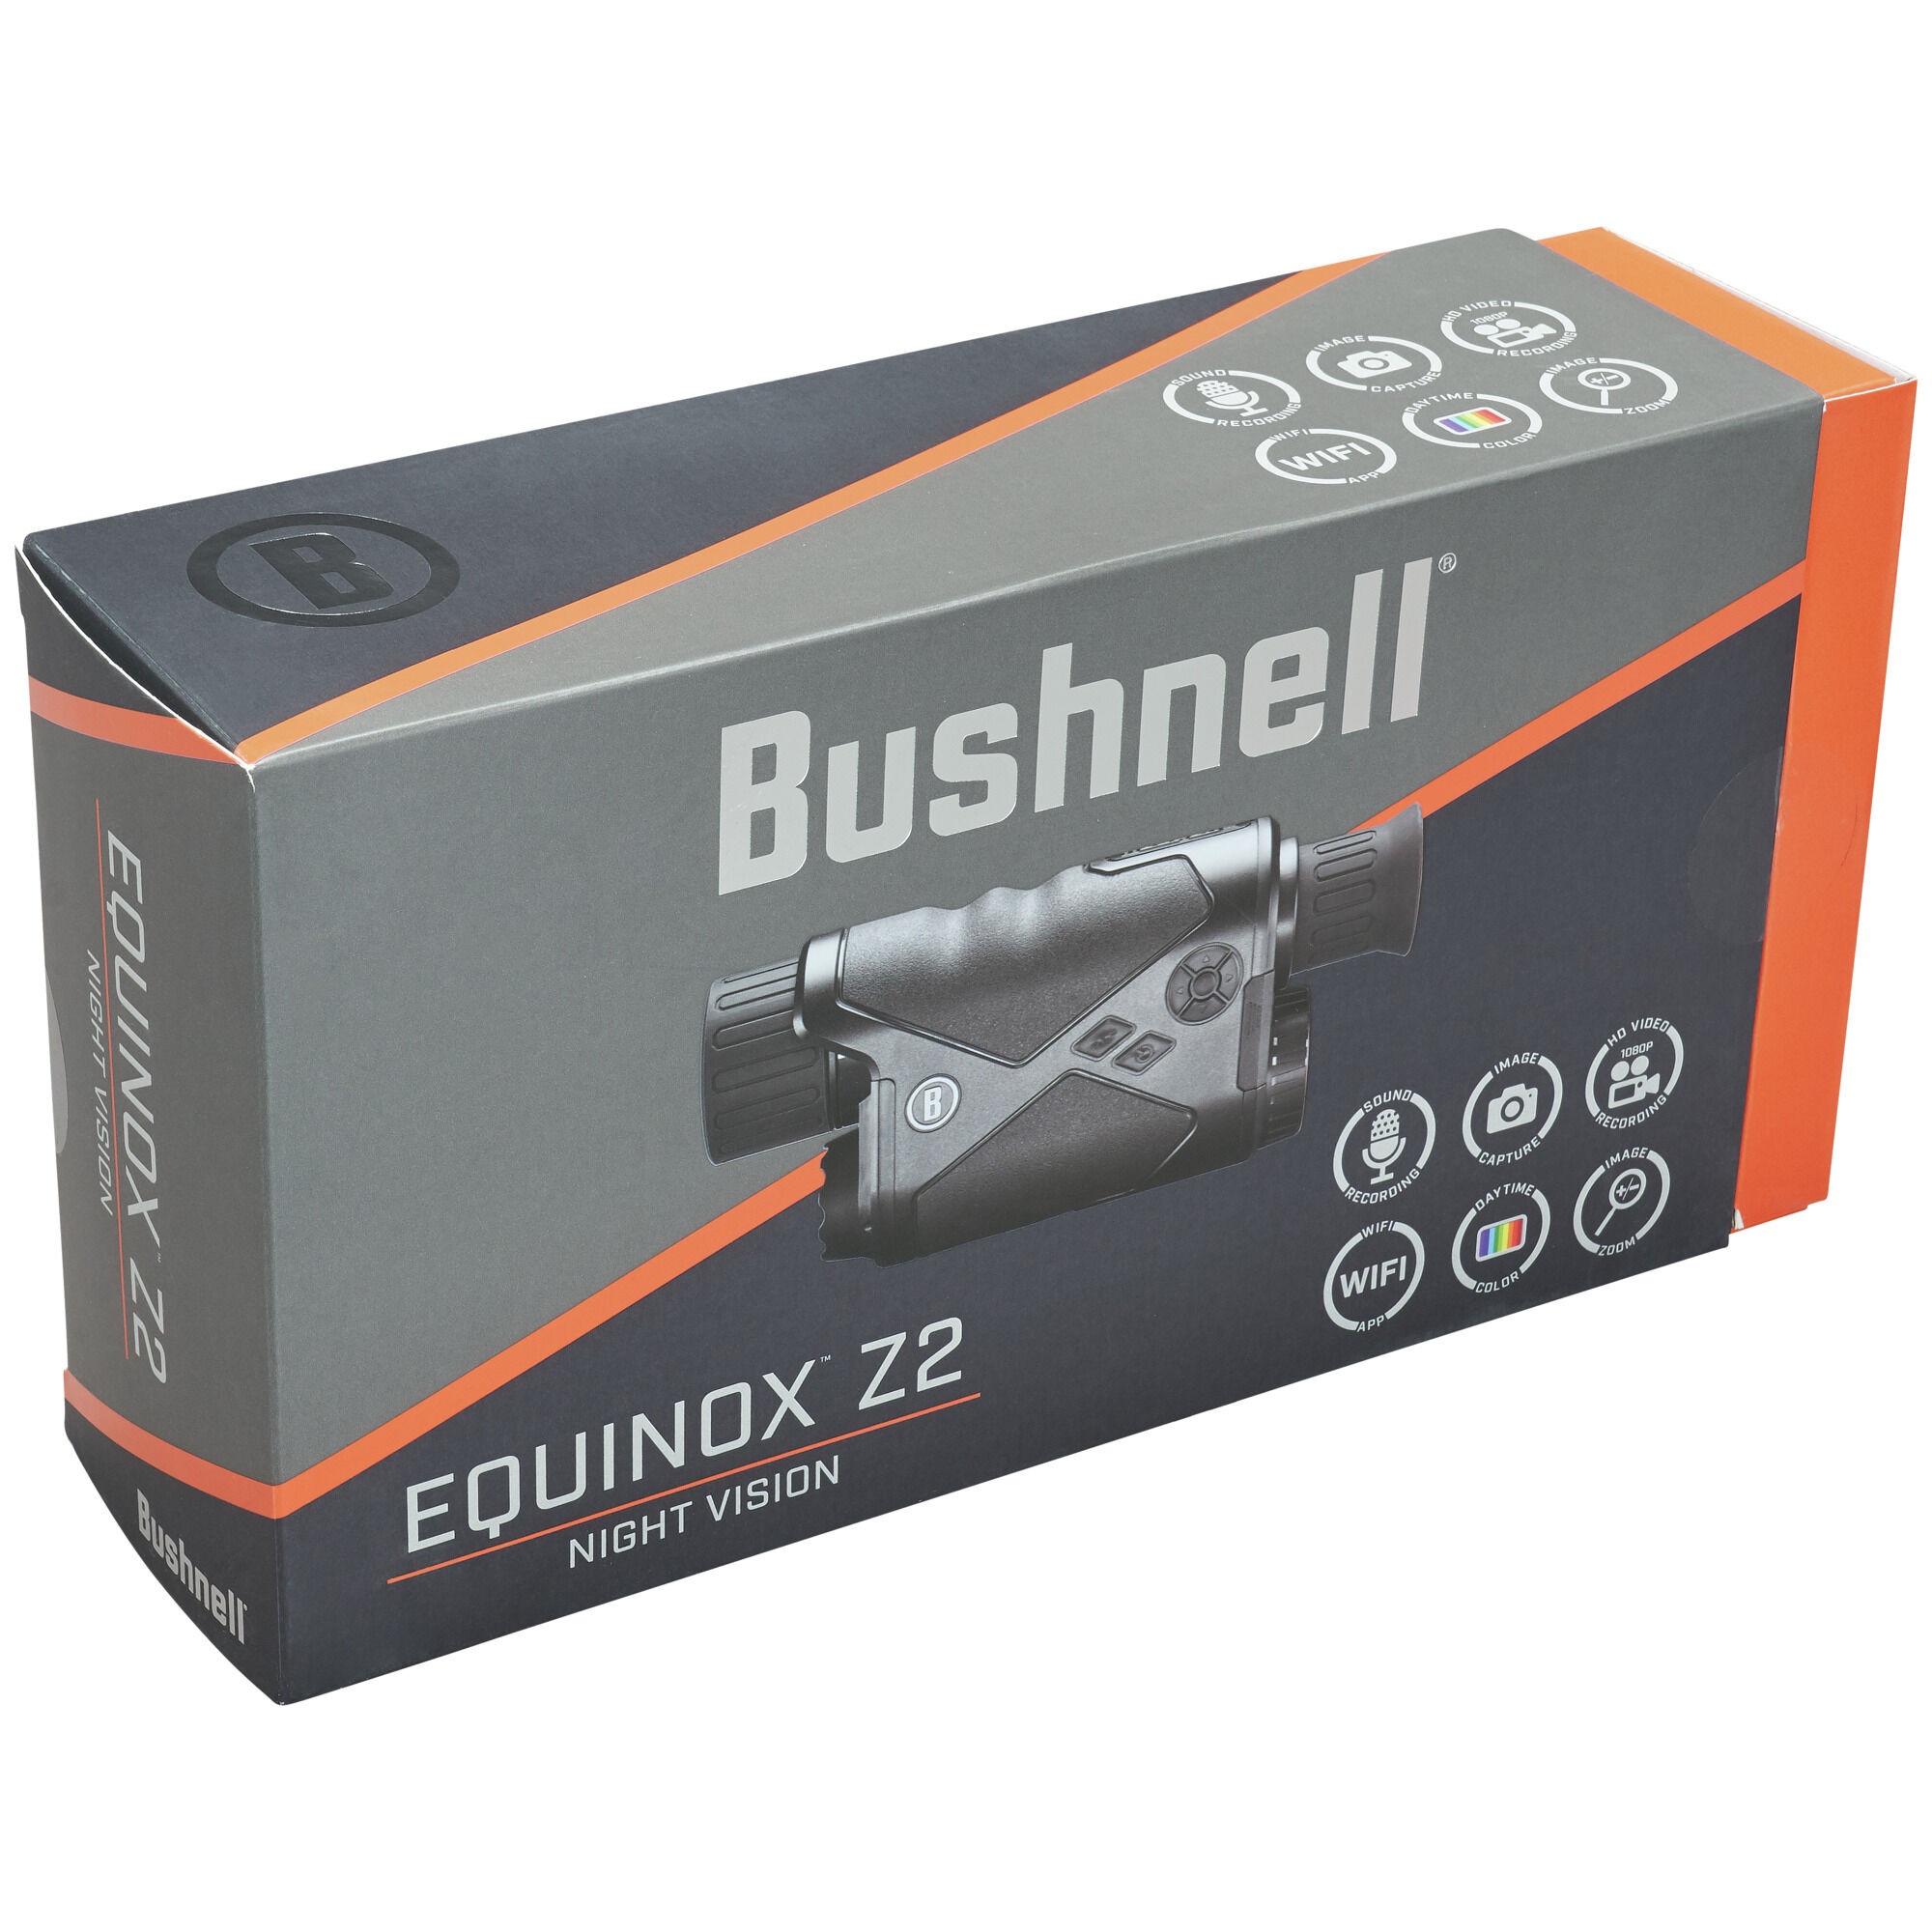 6x50mm Additional Batteries and Lens Cleaning Cloth 32GB SD Card Bushnell Equinox Z2 Digital Night Vision Monocular 